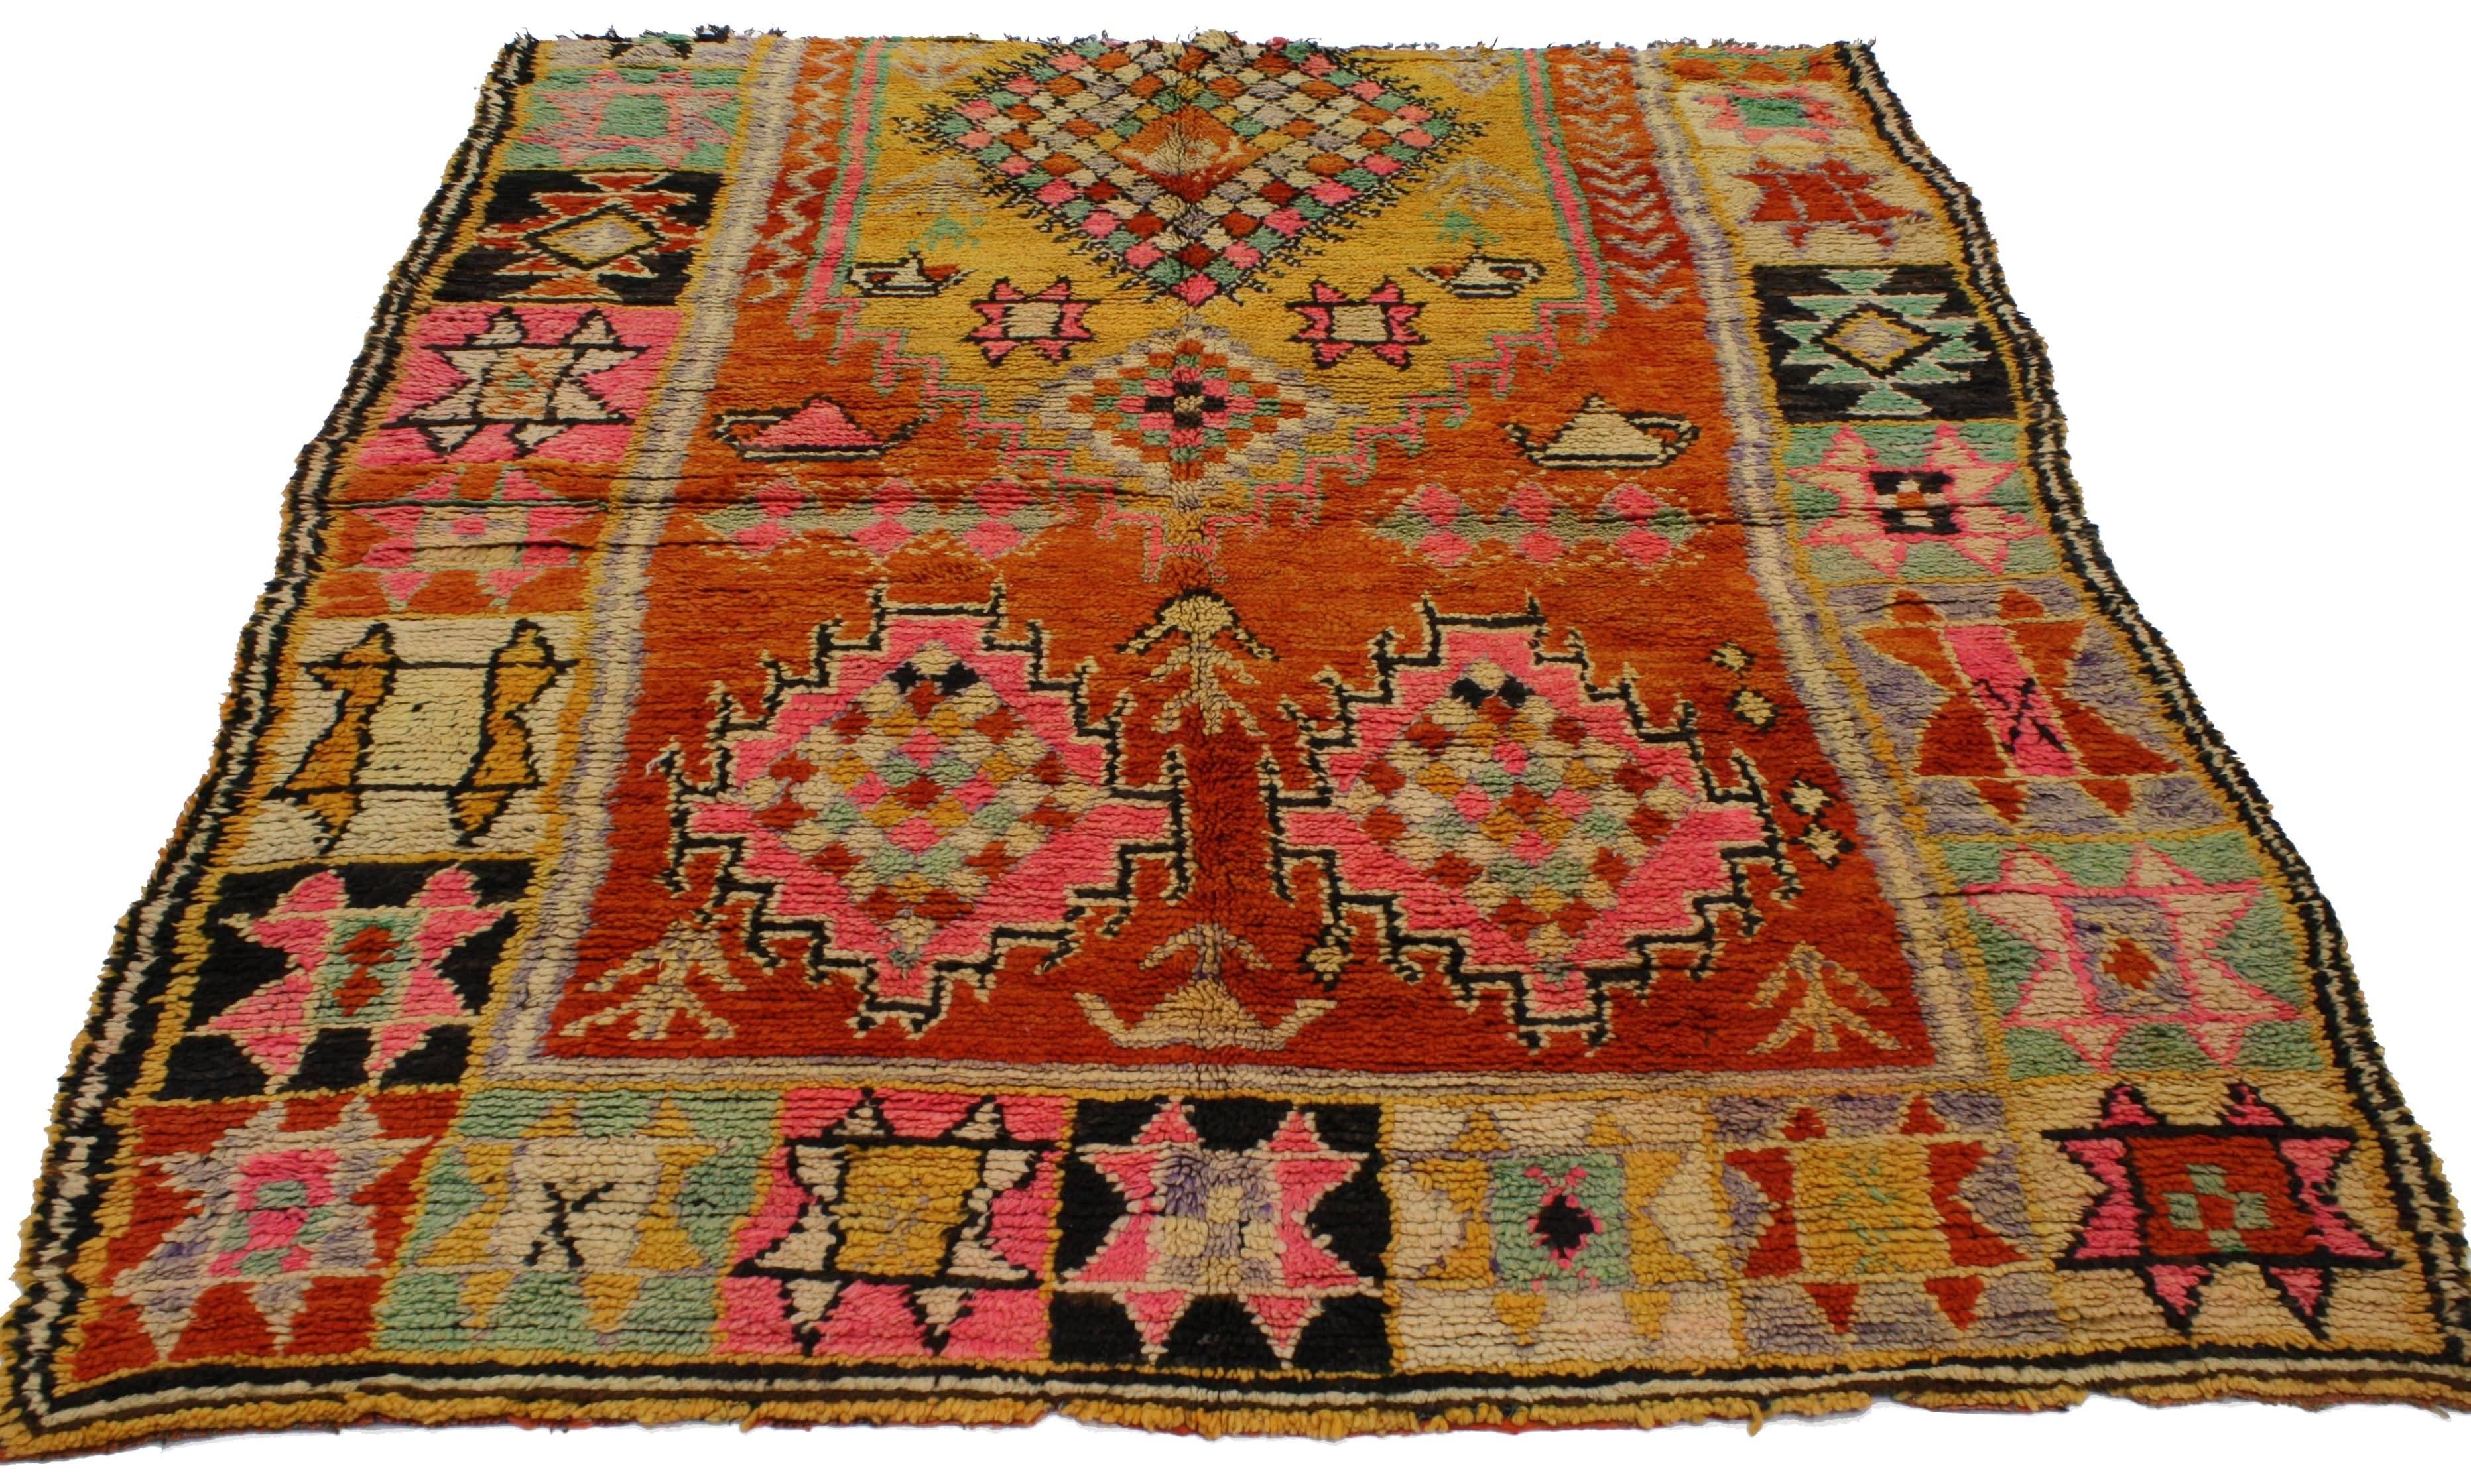 20043, vintage Berber Moroccan rug with tribal style. This impressive vintage Berber Moroccan rug features a mihrab-like niche pattern with colorful symbolism throughout the centre field and border on three sides. A mustard yellow medallion filled